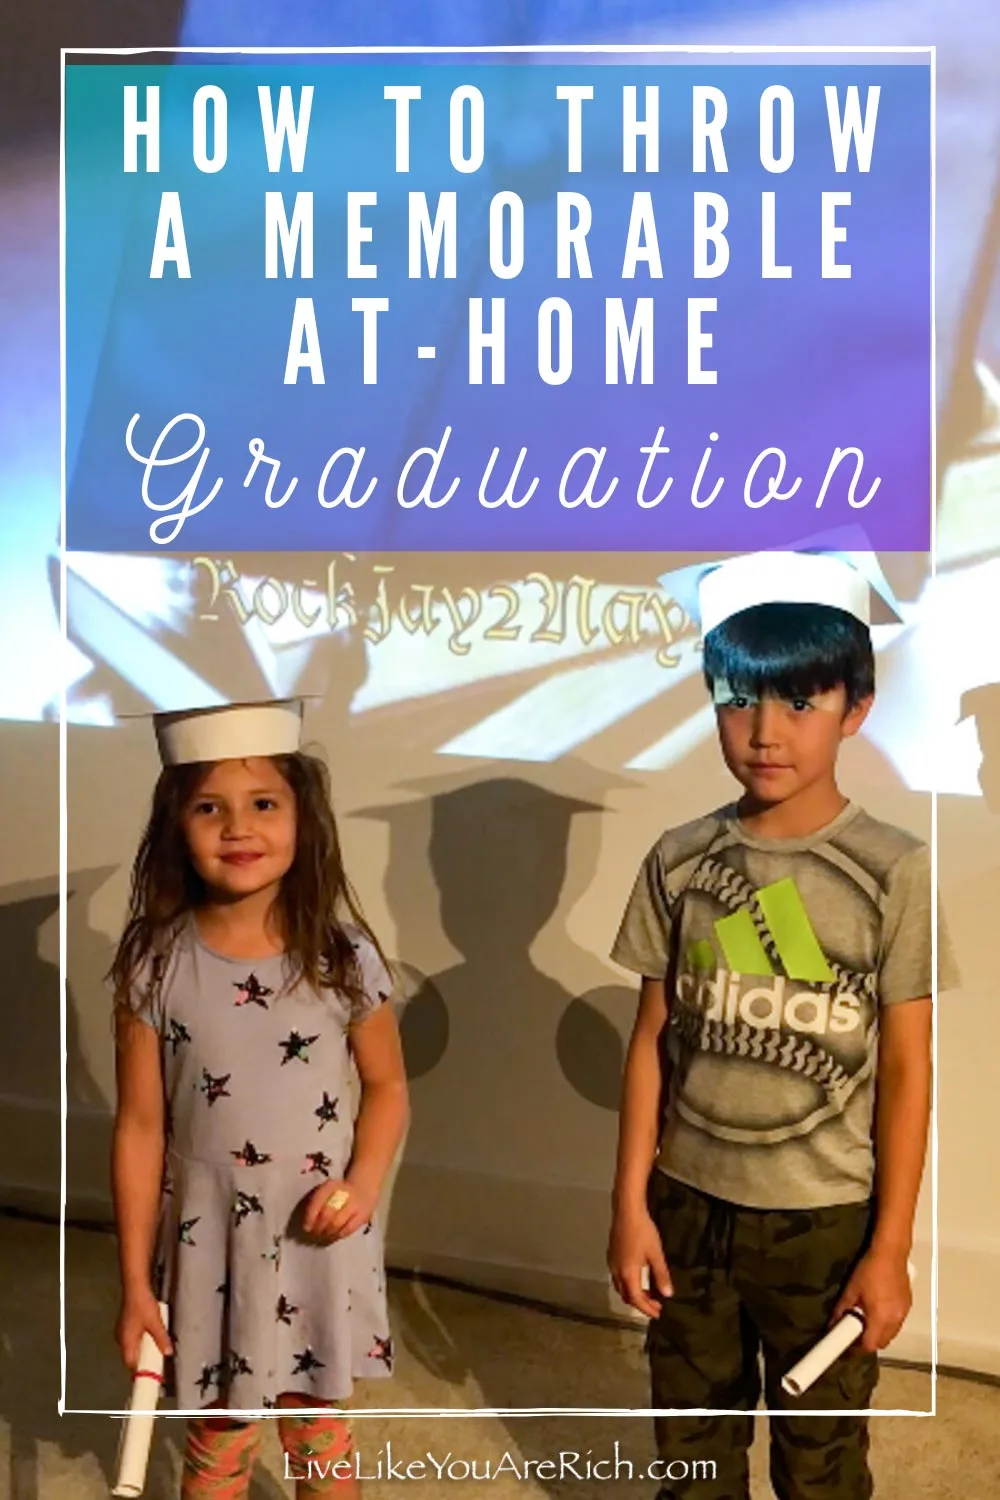 Since the stay-at-home order, I have wanted to keep the kids learning and productive. They did such a great job of completing all of their tasks each day. To celebrate their hard work and stick-to-itiveness, my husband and I put on an At-Home Graduation. #graduationparty #stayhome